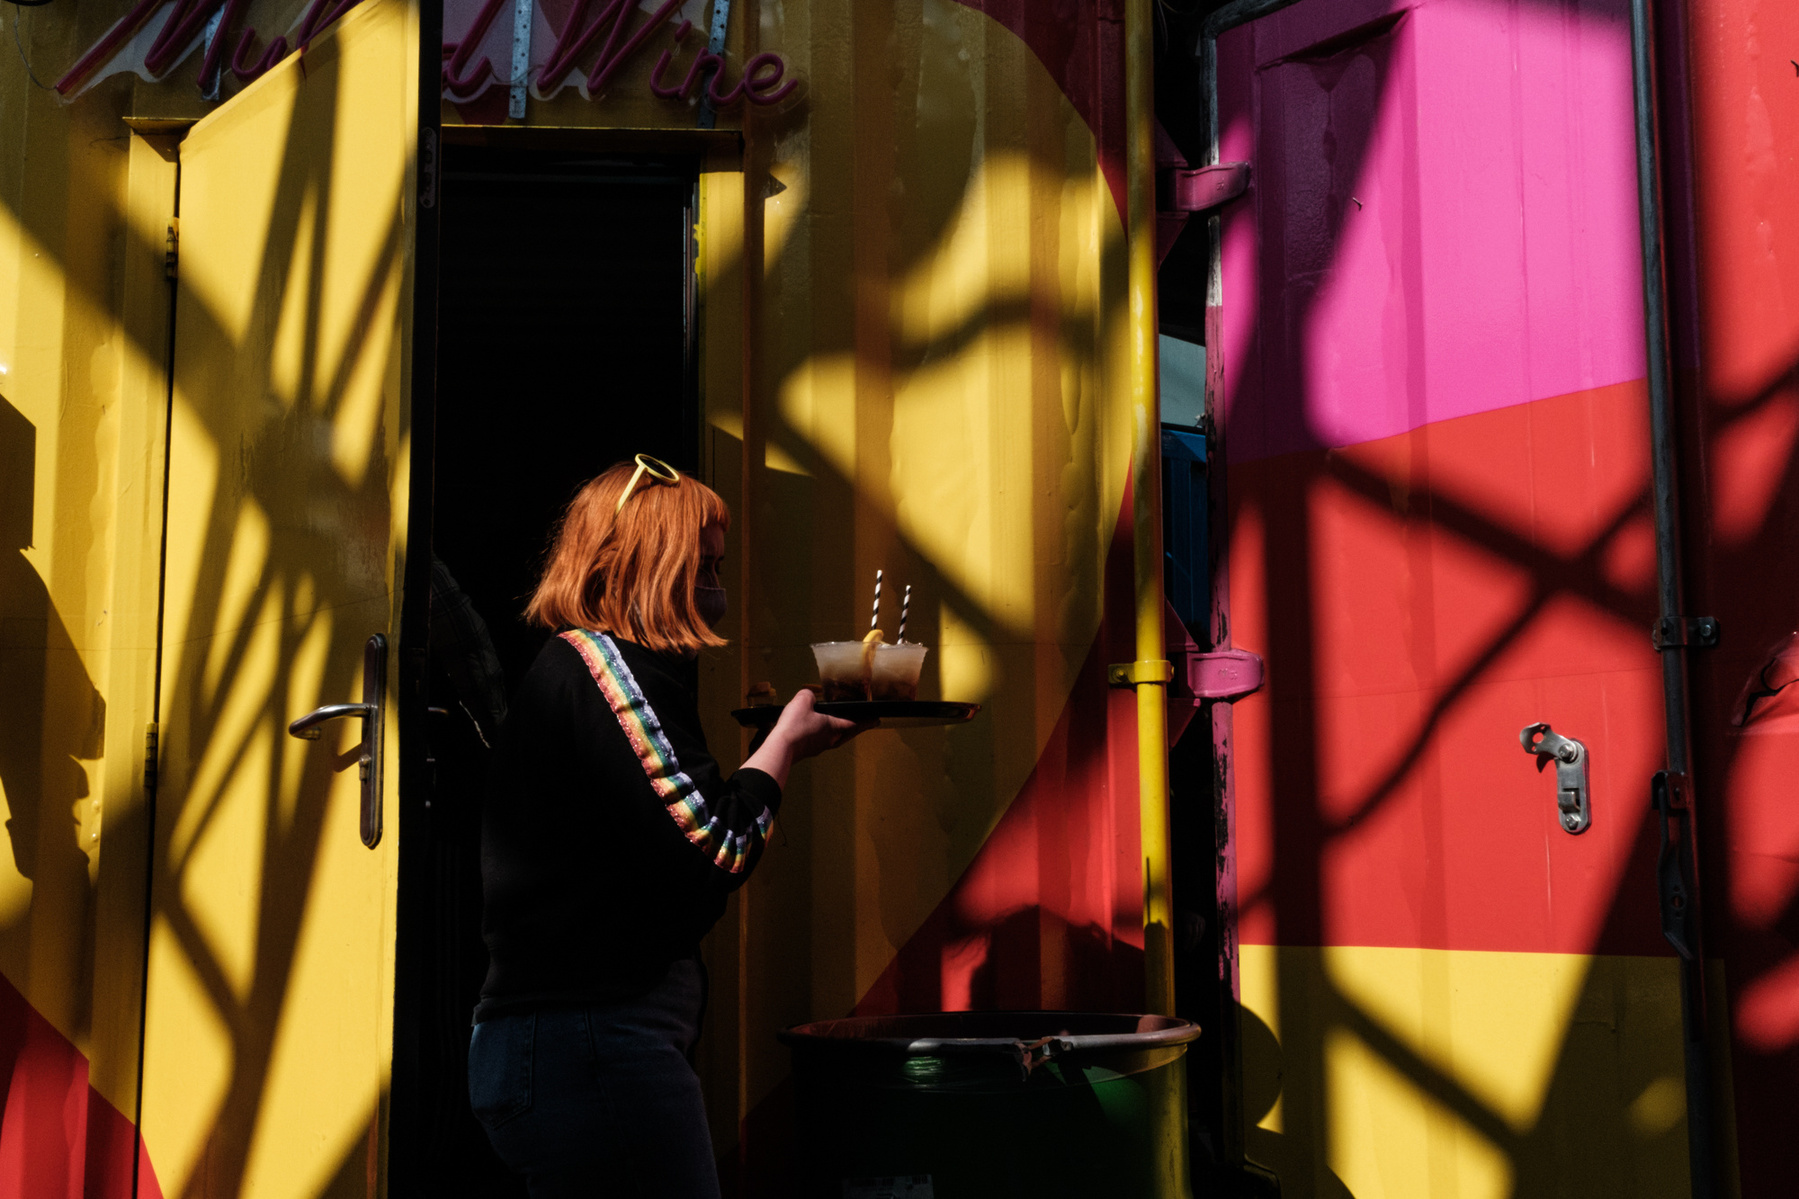 woman with red hair and stripes on sleeves carrying cocktails on a tray passing a very colourful hello, pink and red wall with strong shadows and shapes